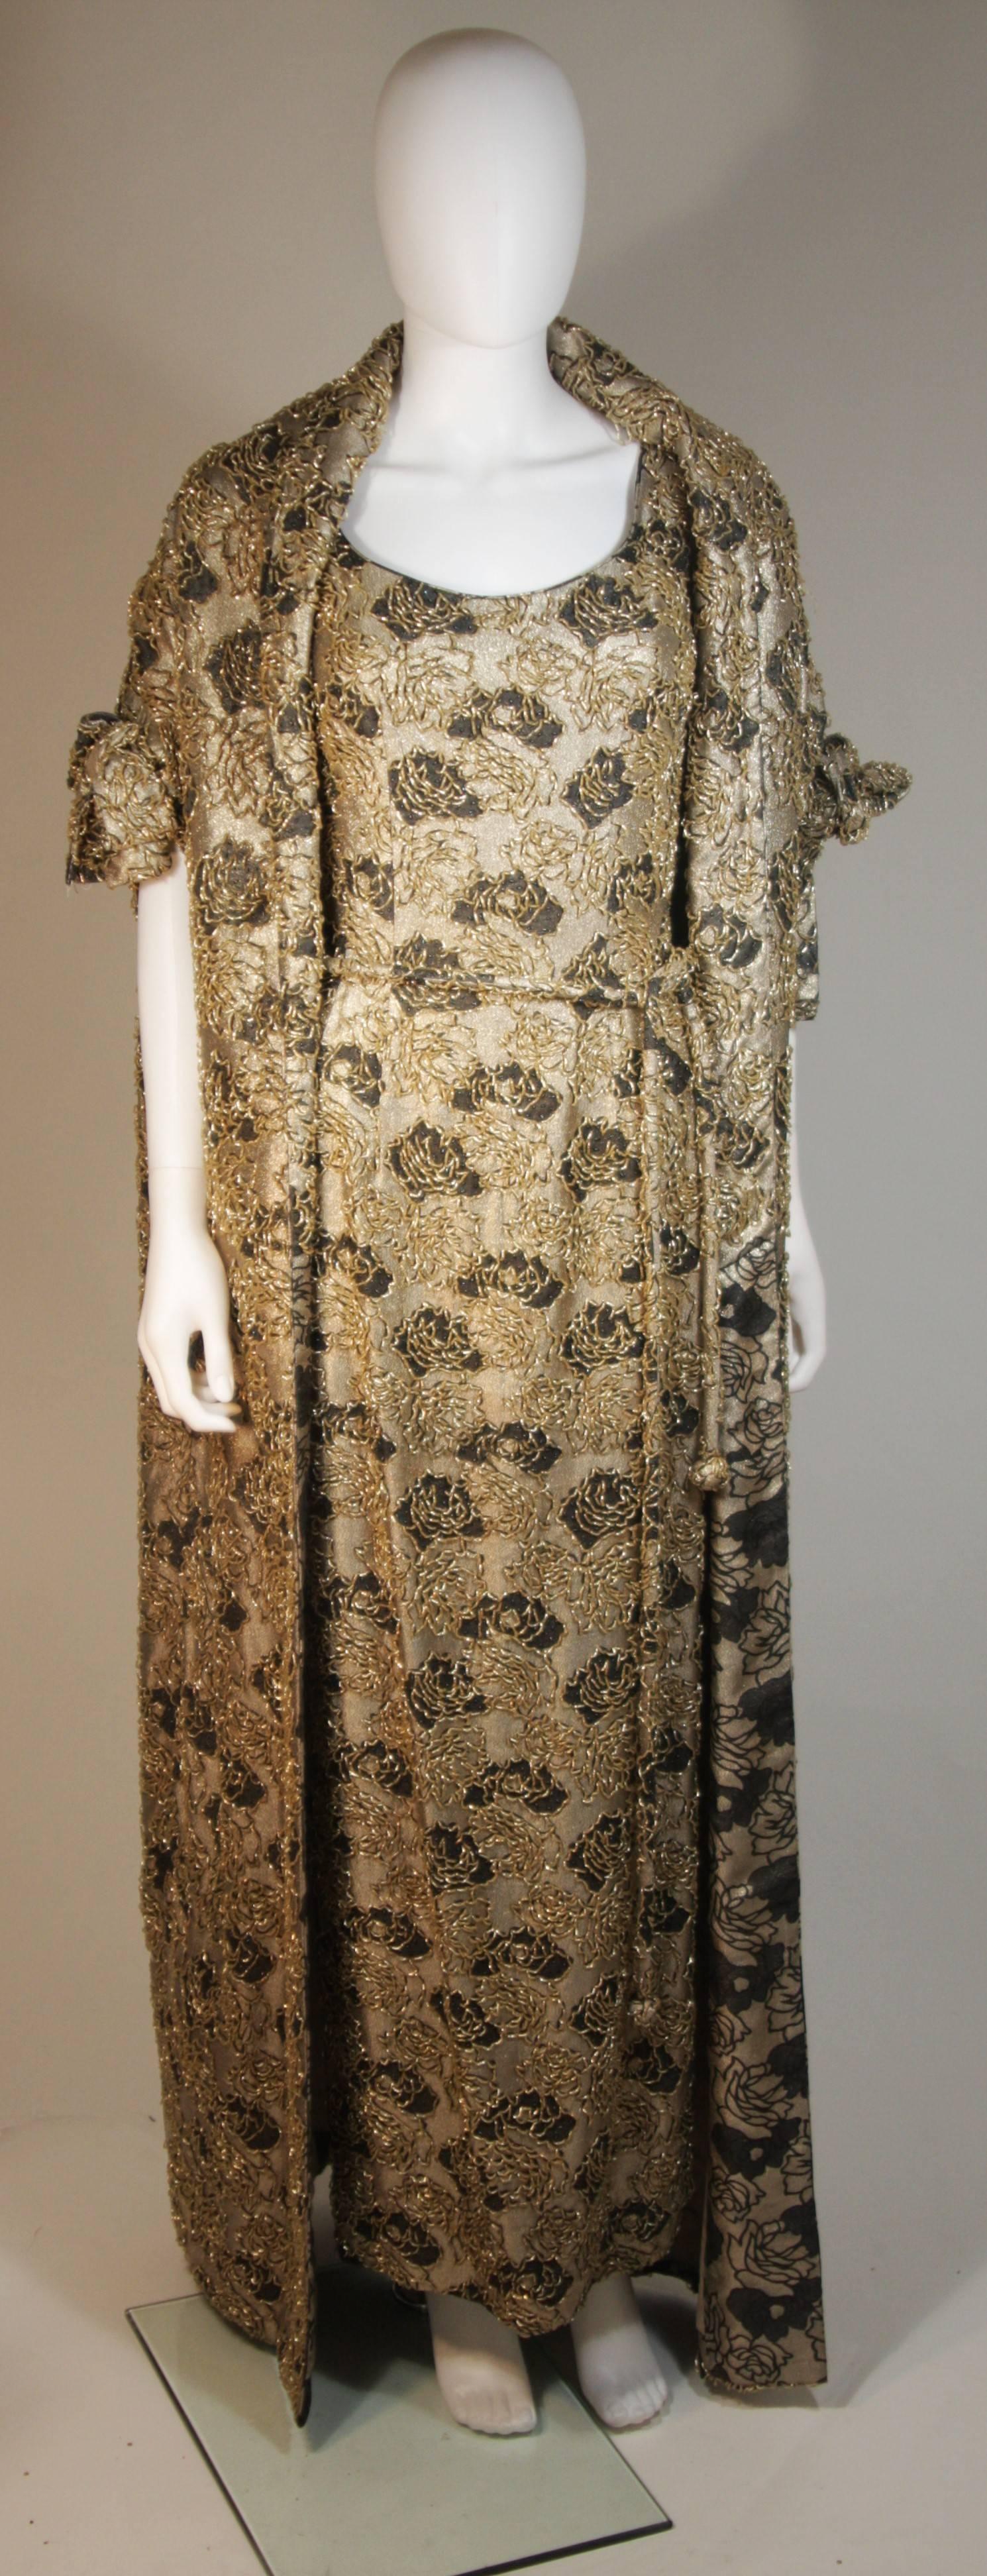 This Haute Couture Int'l  ensemble is composed of a beaded silk with floral motif in gold and black. The gown features a center back zipper and belt. The coat is a n open style with sleeve details. Lovely set. In excellent vintage condition, the